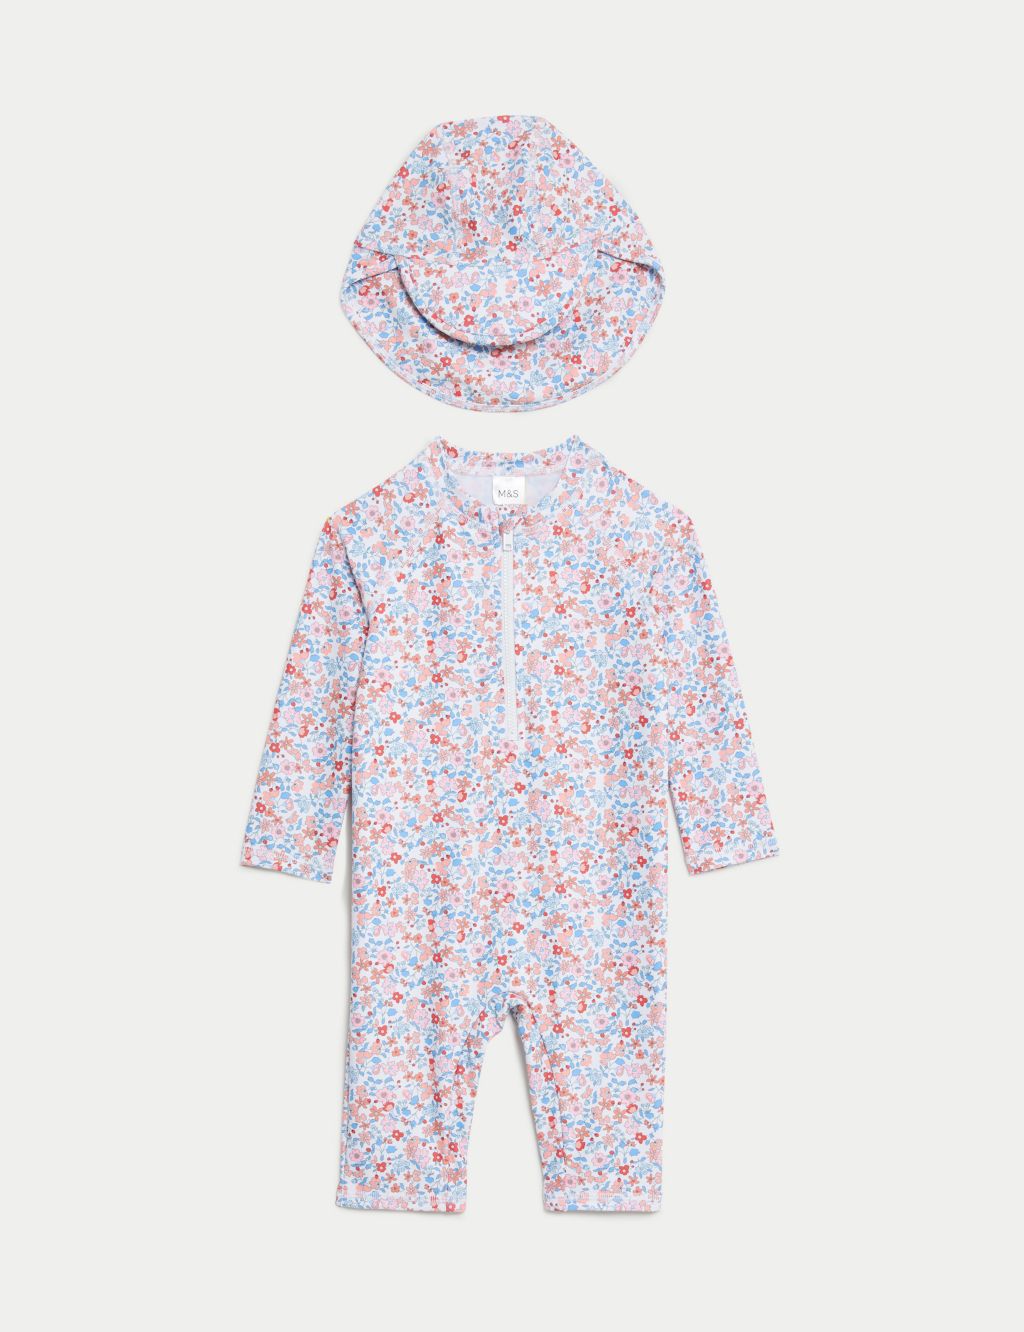 2pc Floral Swimsuit and Hat (0-3 Yrs) image 1